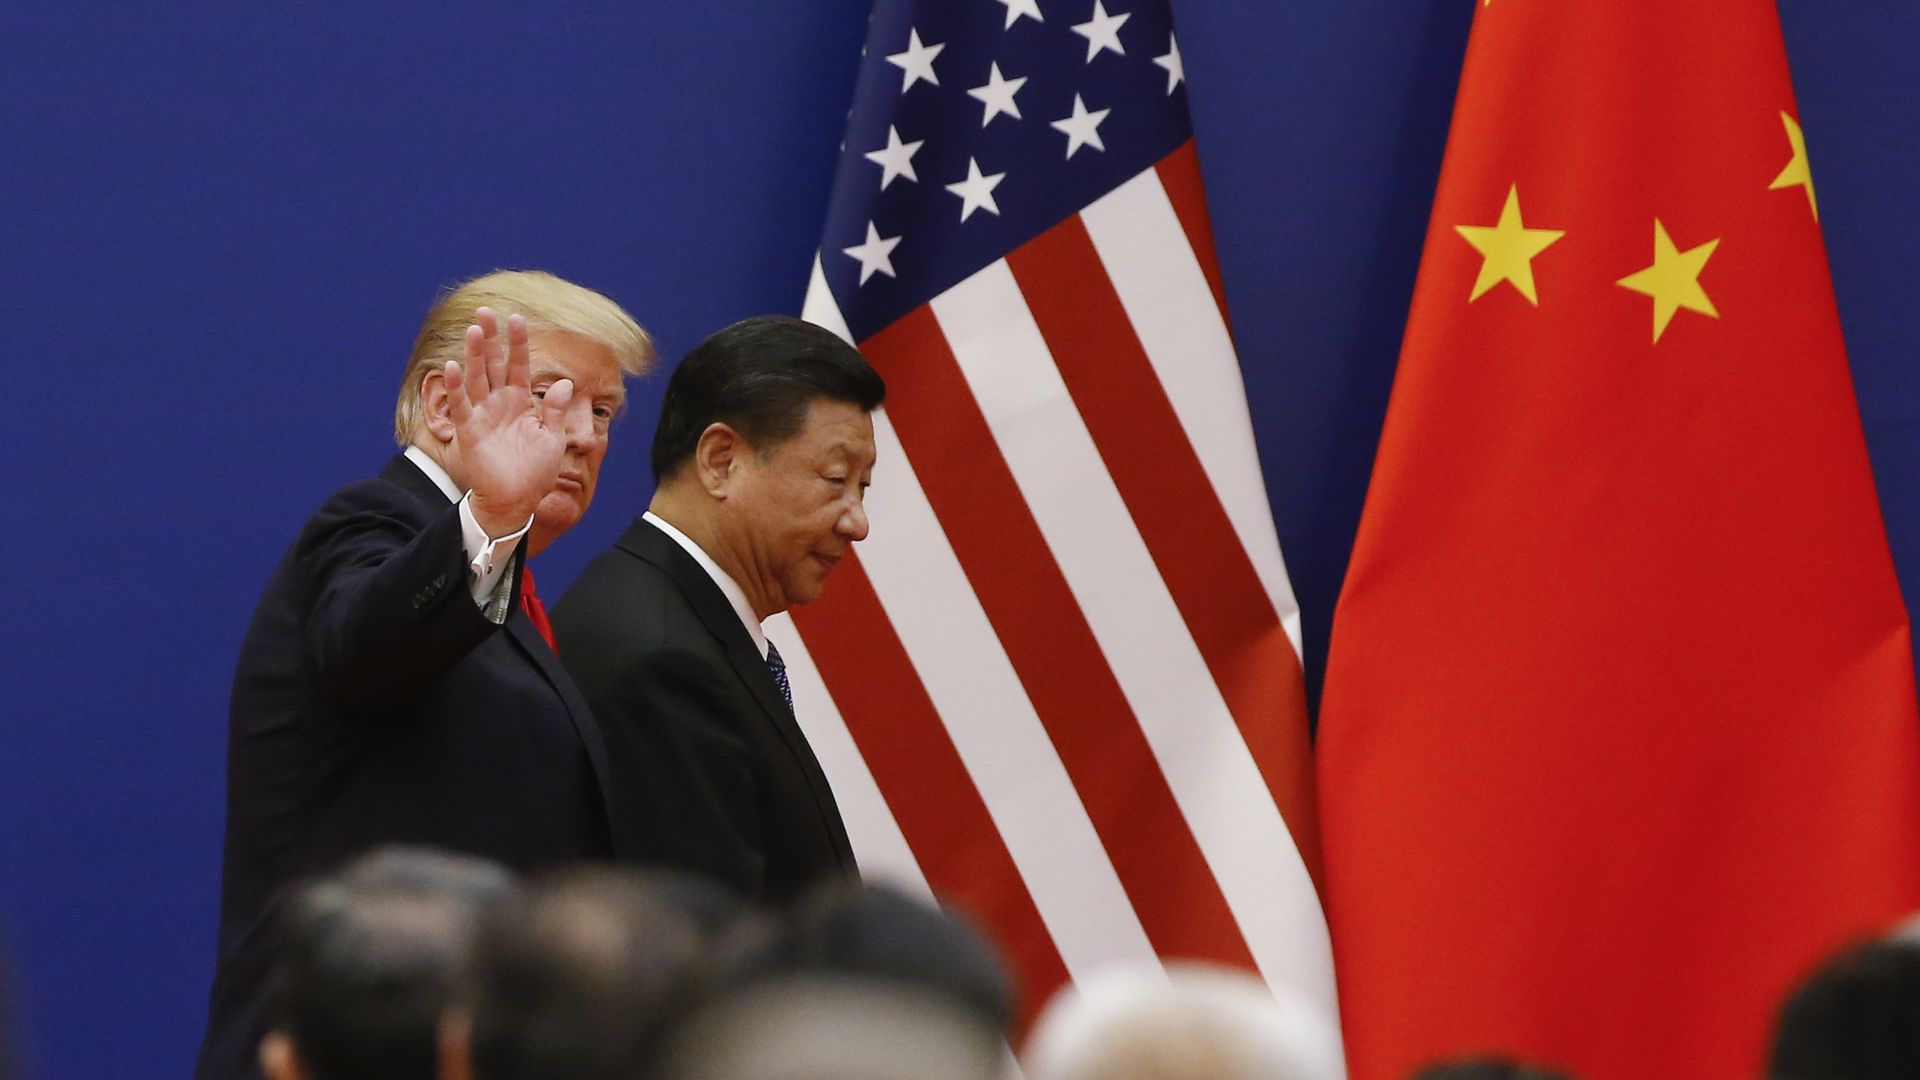 Trump and Xi walk past the American and Chinese flags